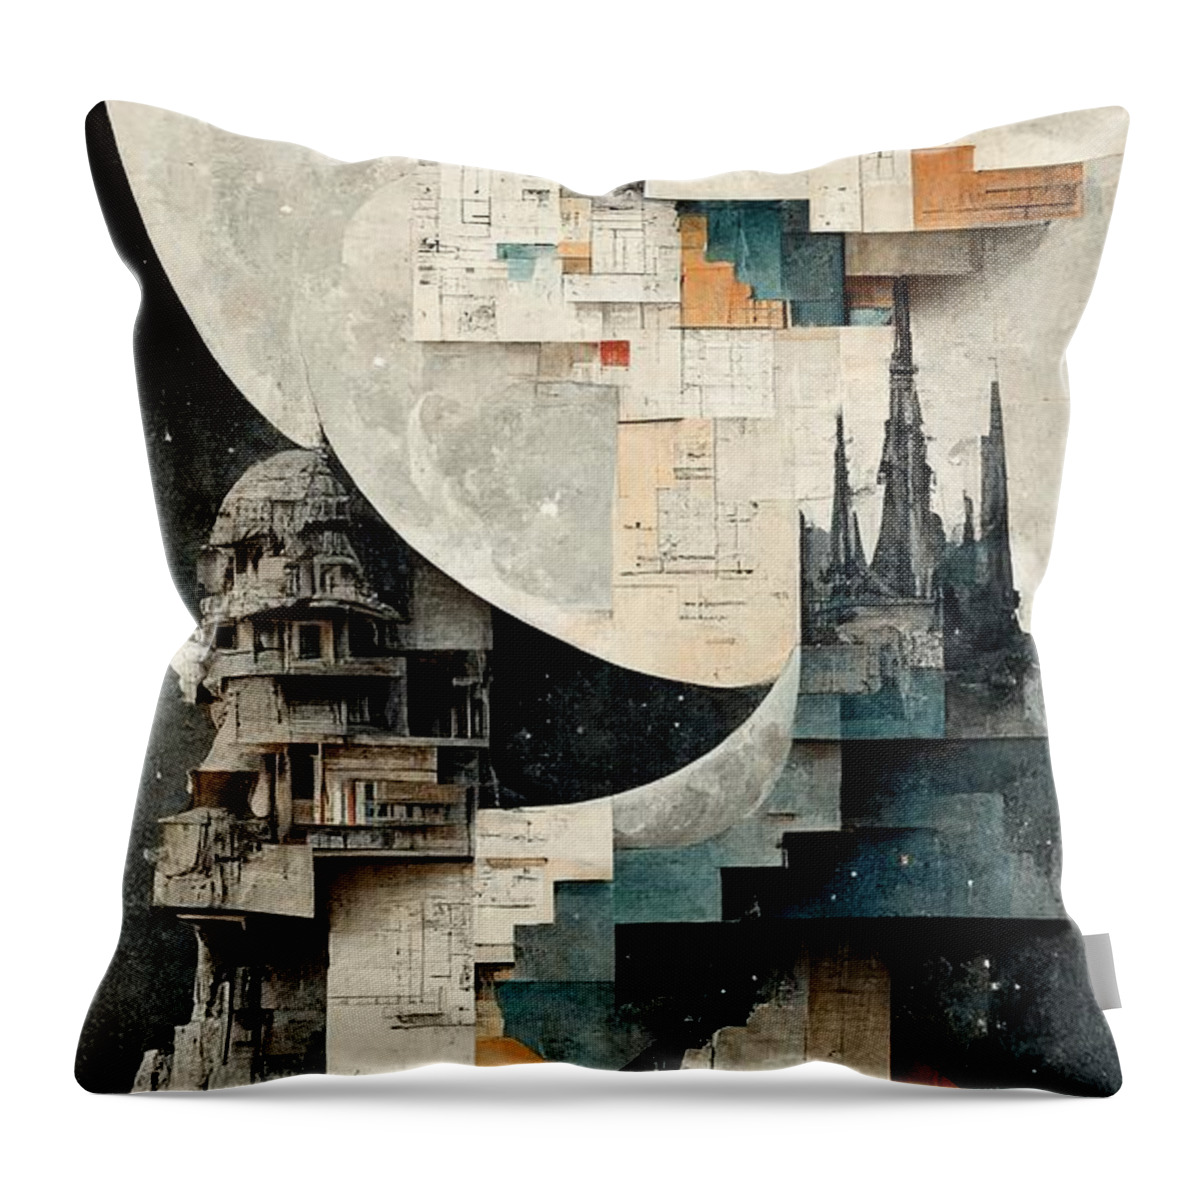 Moon Throw Pillow featuring the digital art Paper Moon by Nickleen Mosher